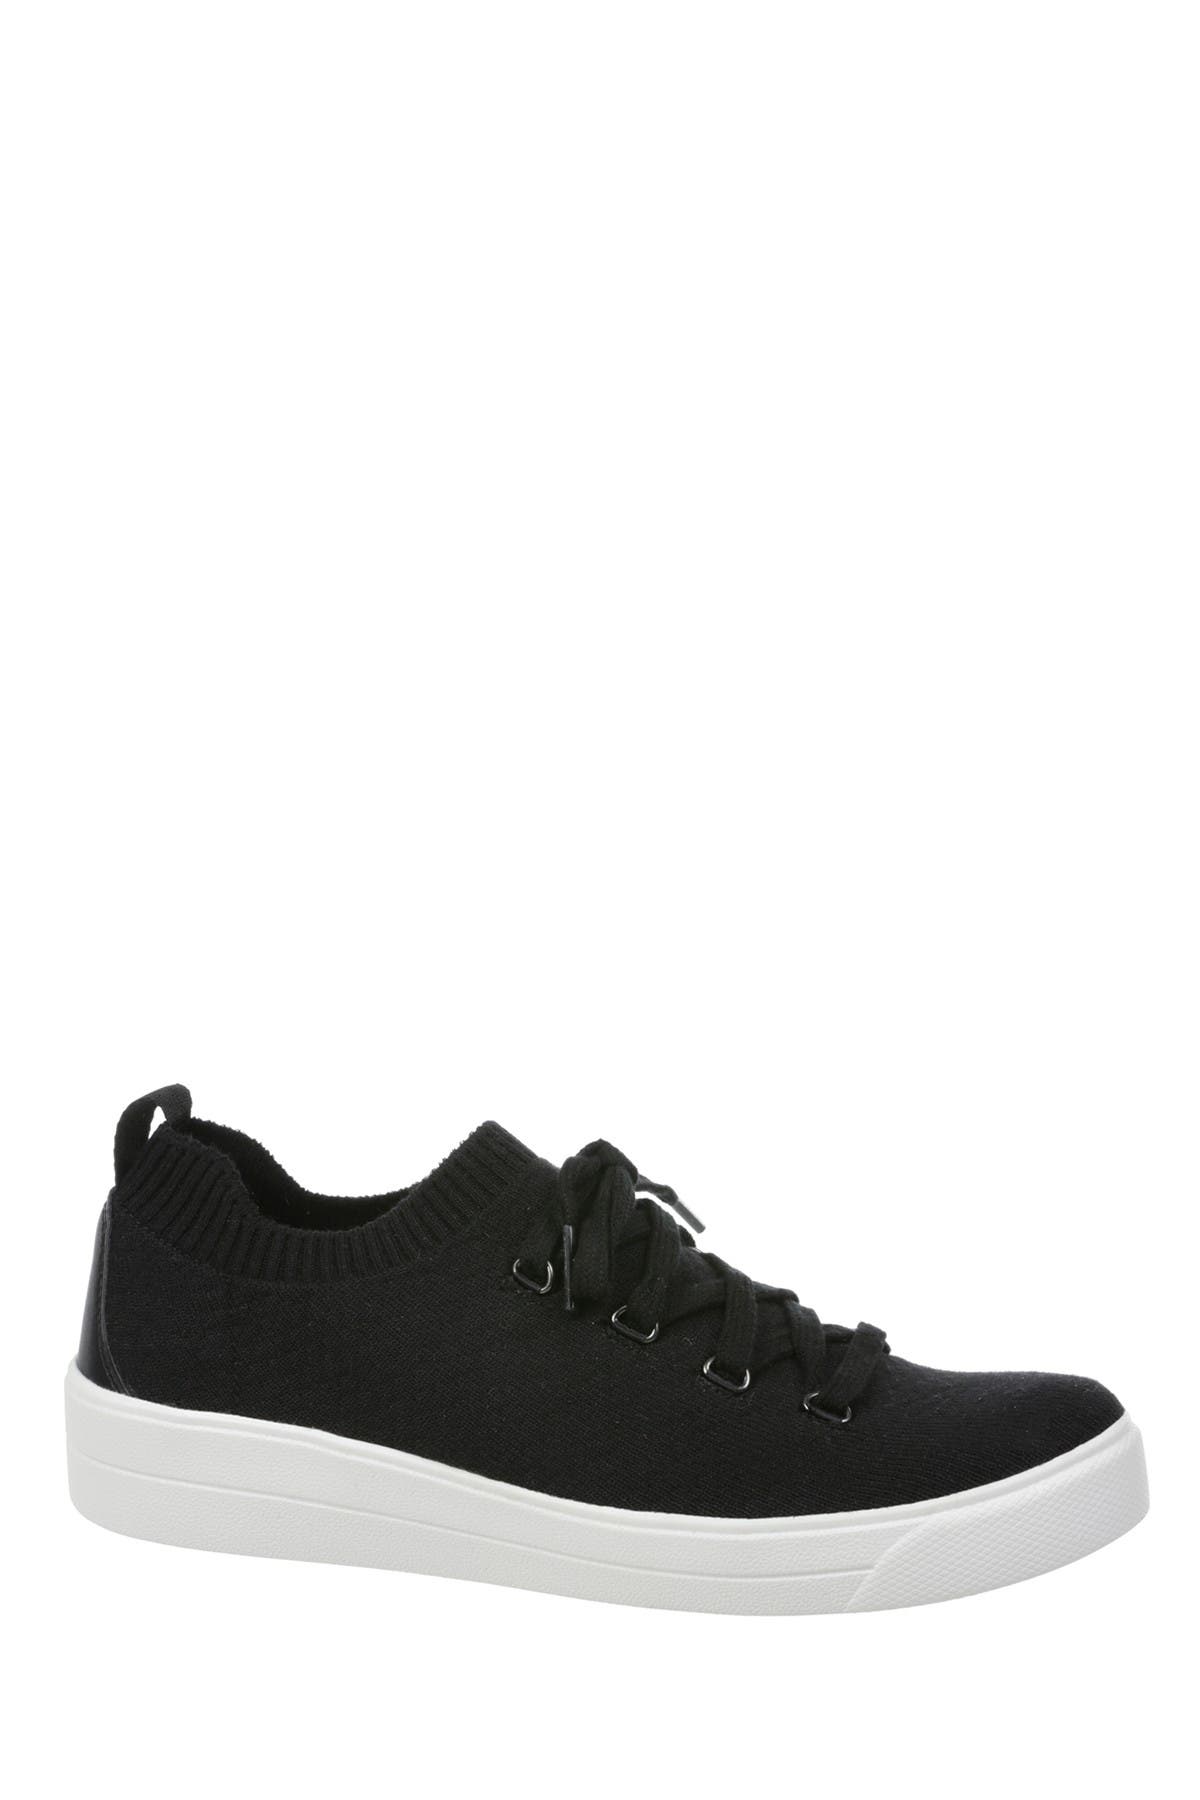 Ryka | Viona Lace-Up White Sole Sneaker 